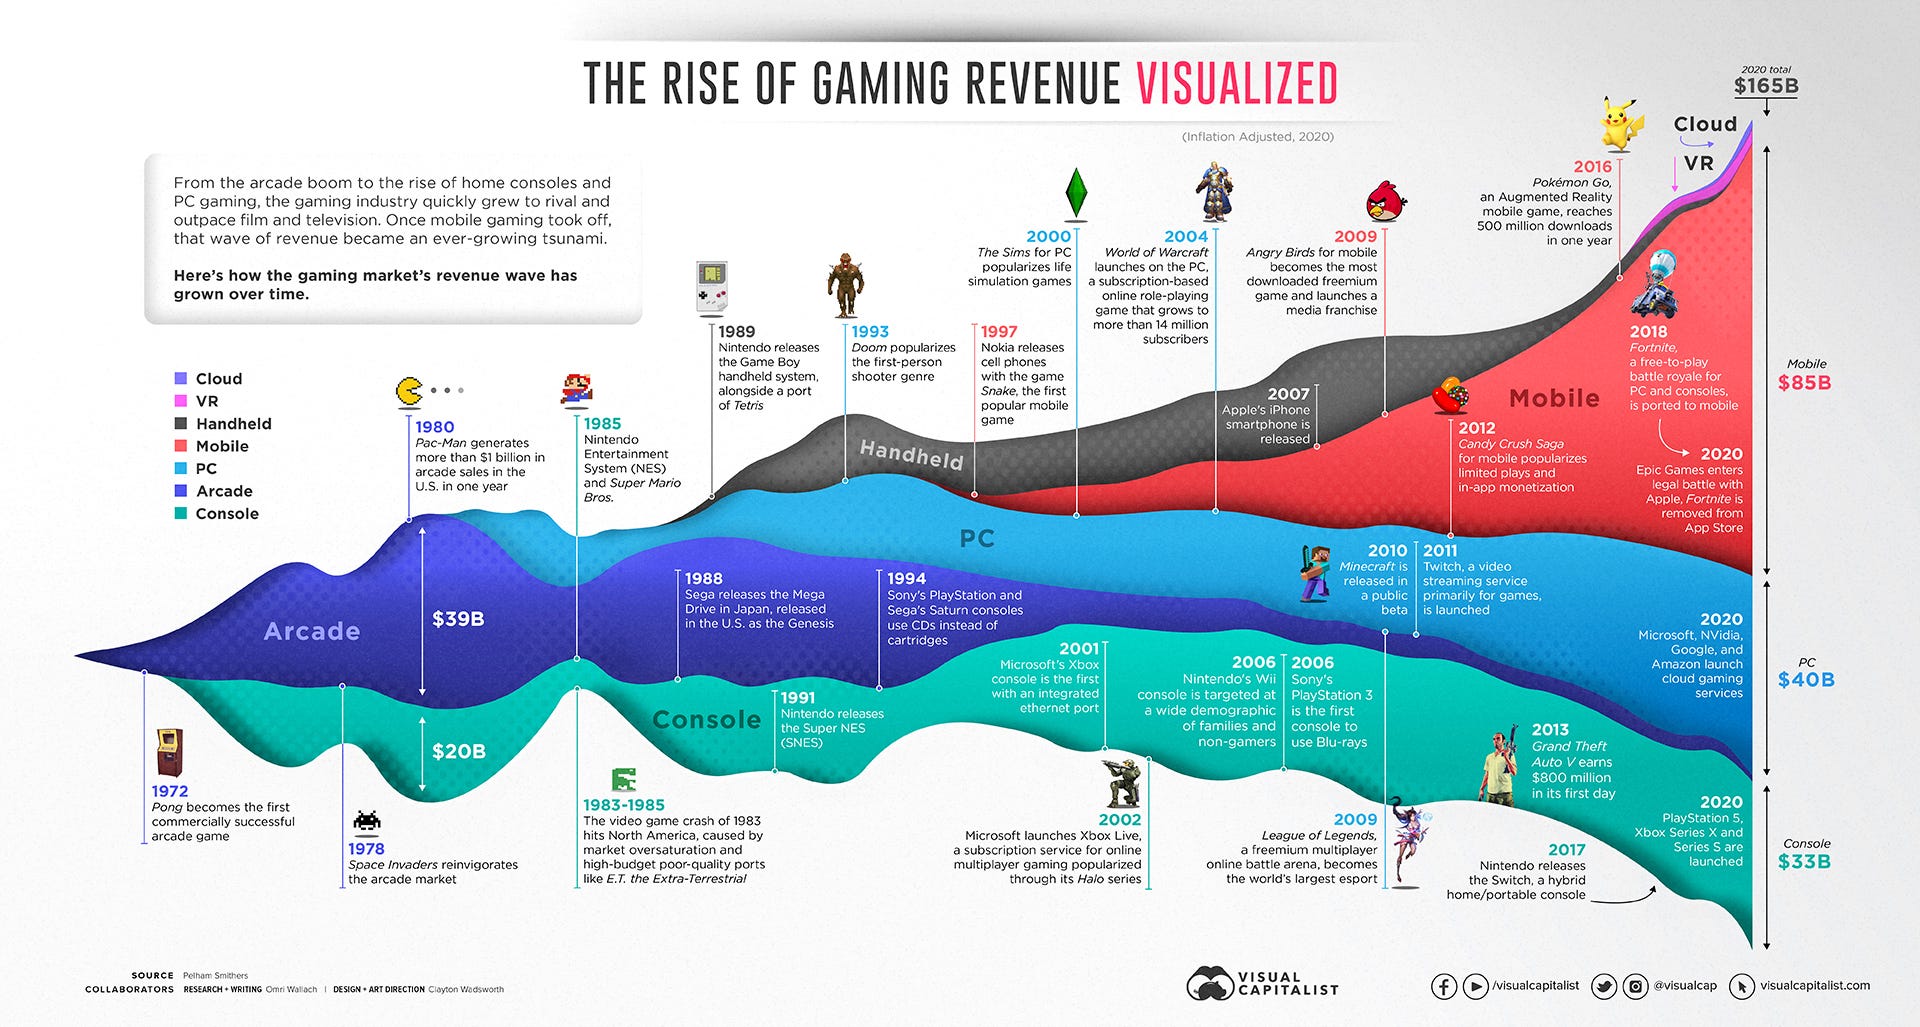 Over Half of 2022 Gaming Revenue to Come From Hypercasual Game Apps